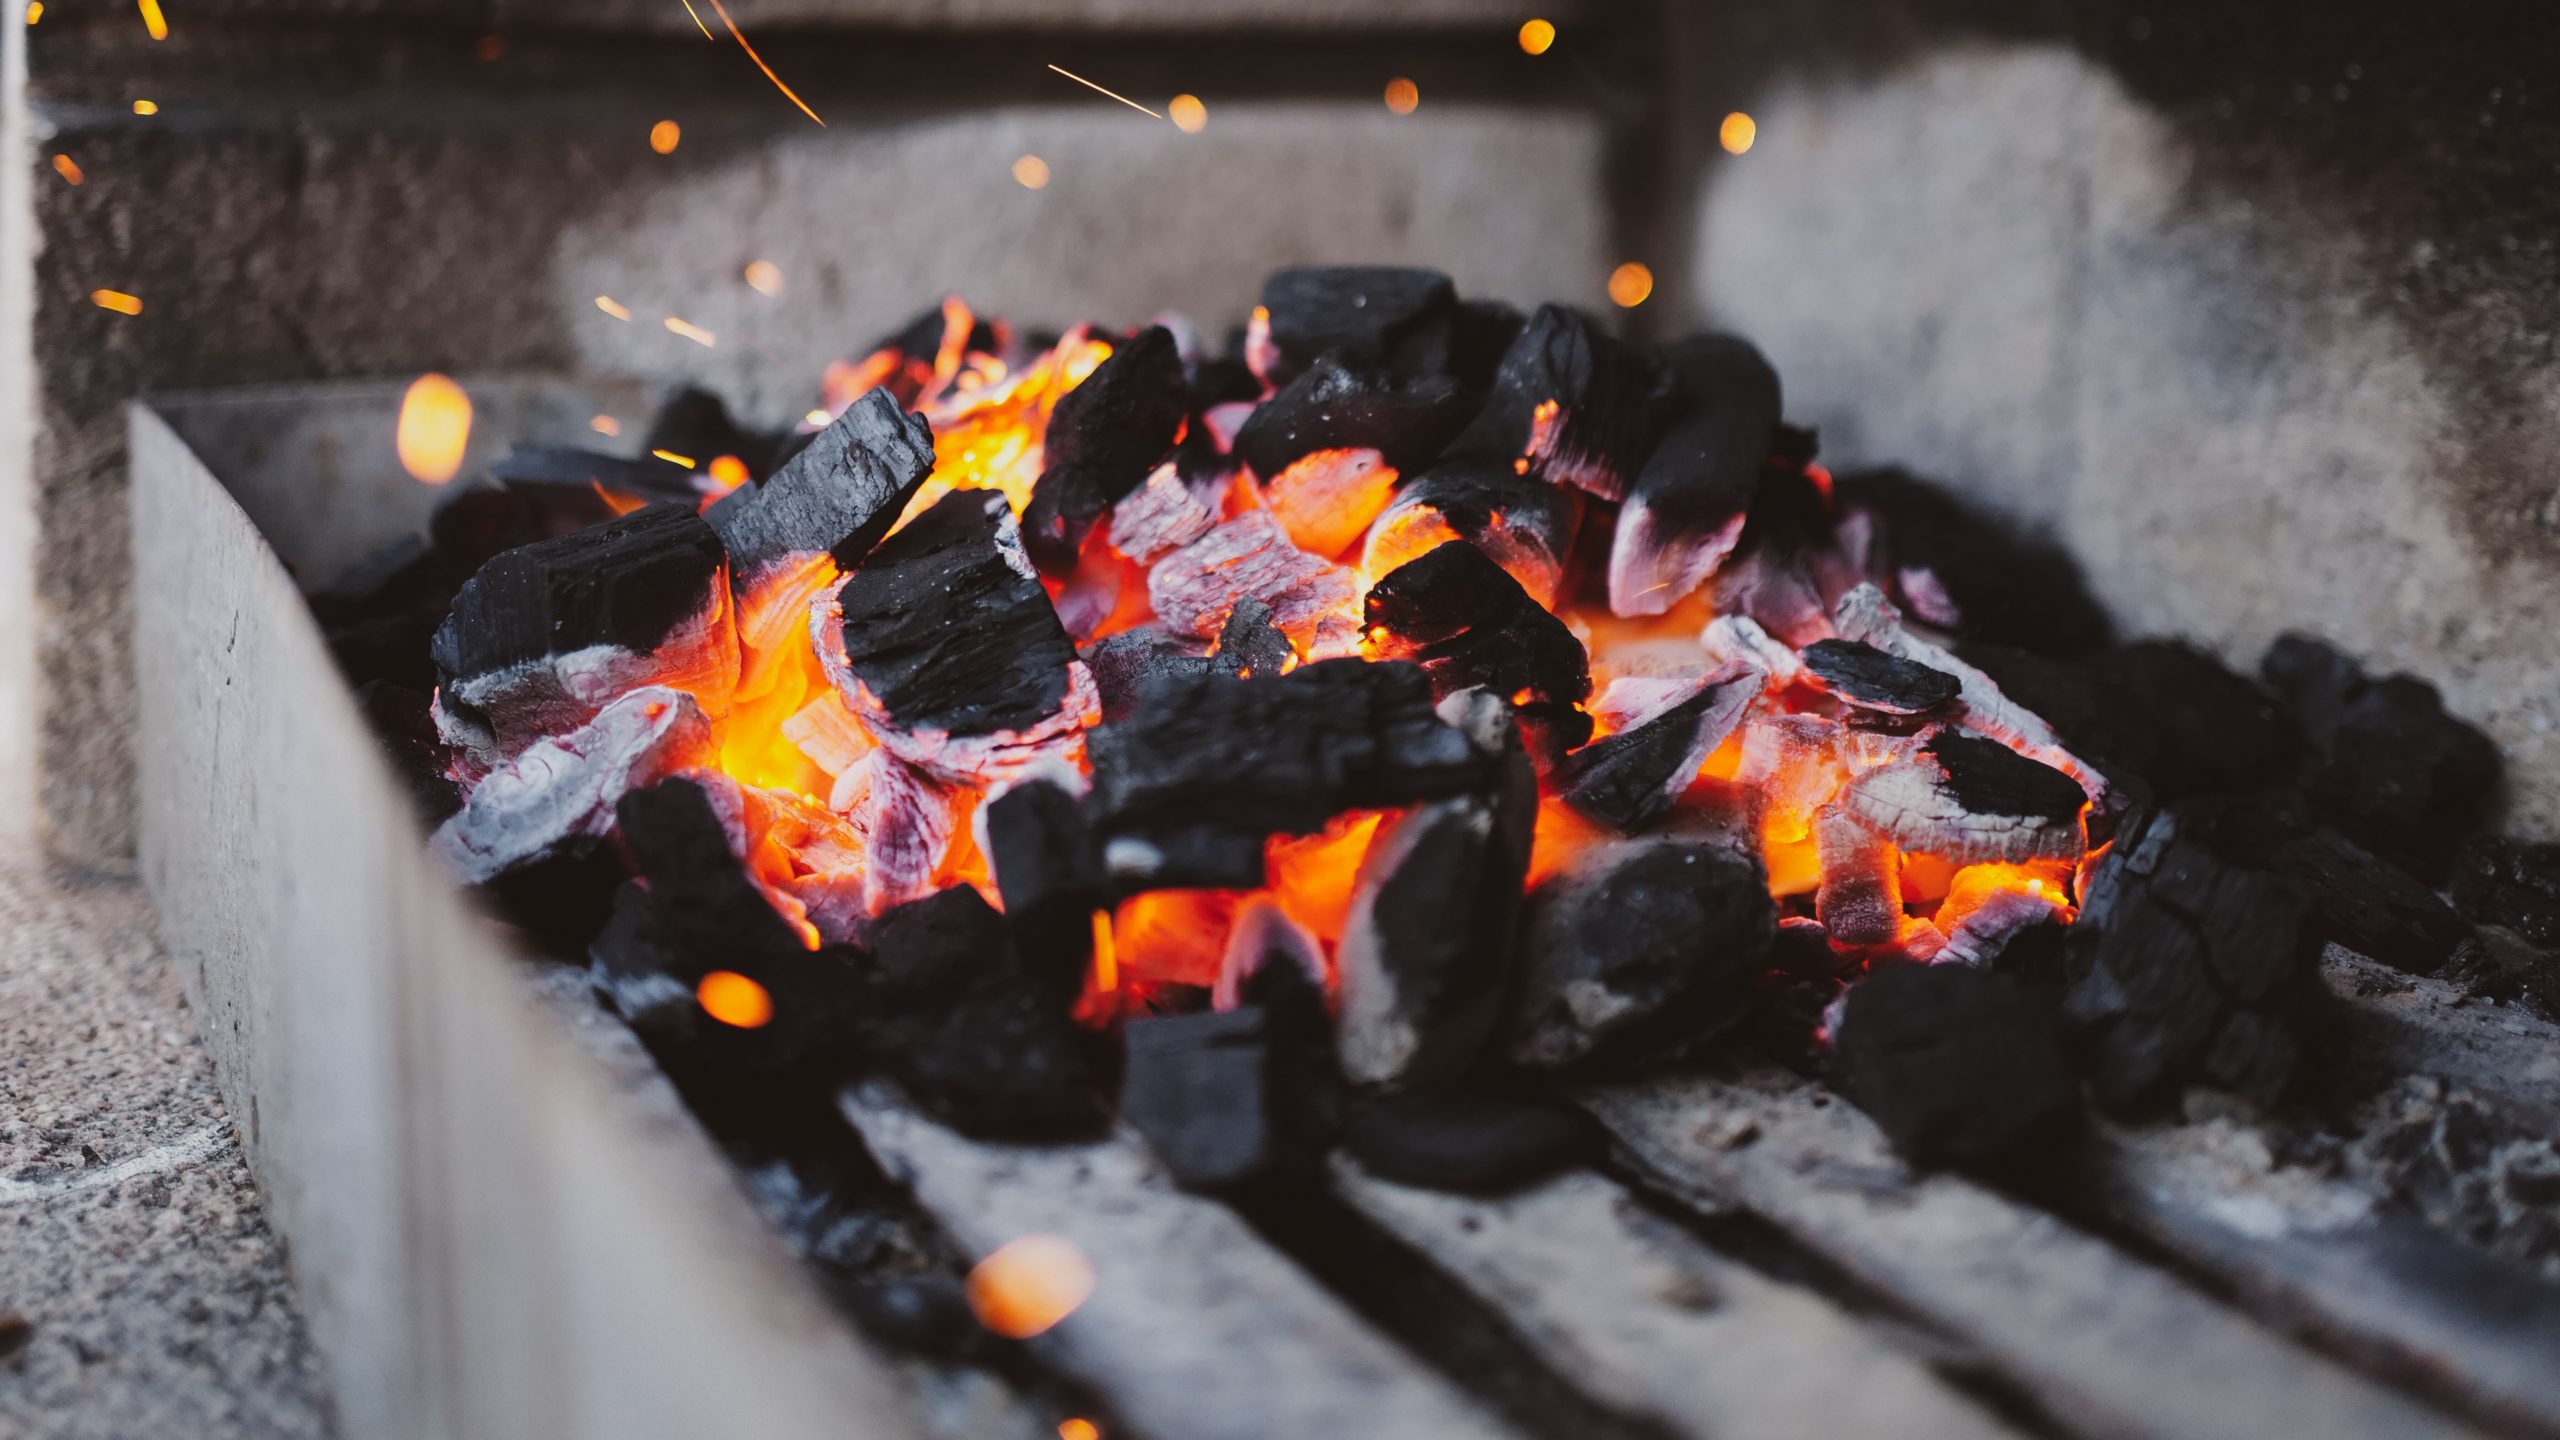 Coals burning on a barbecue pit.